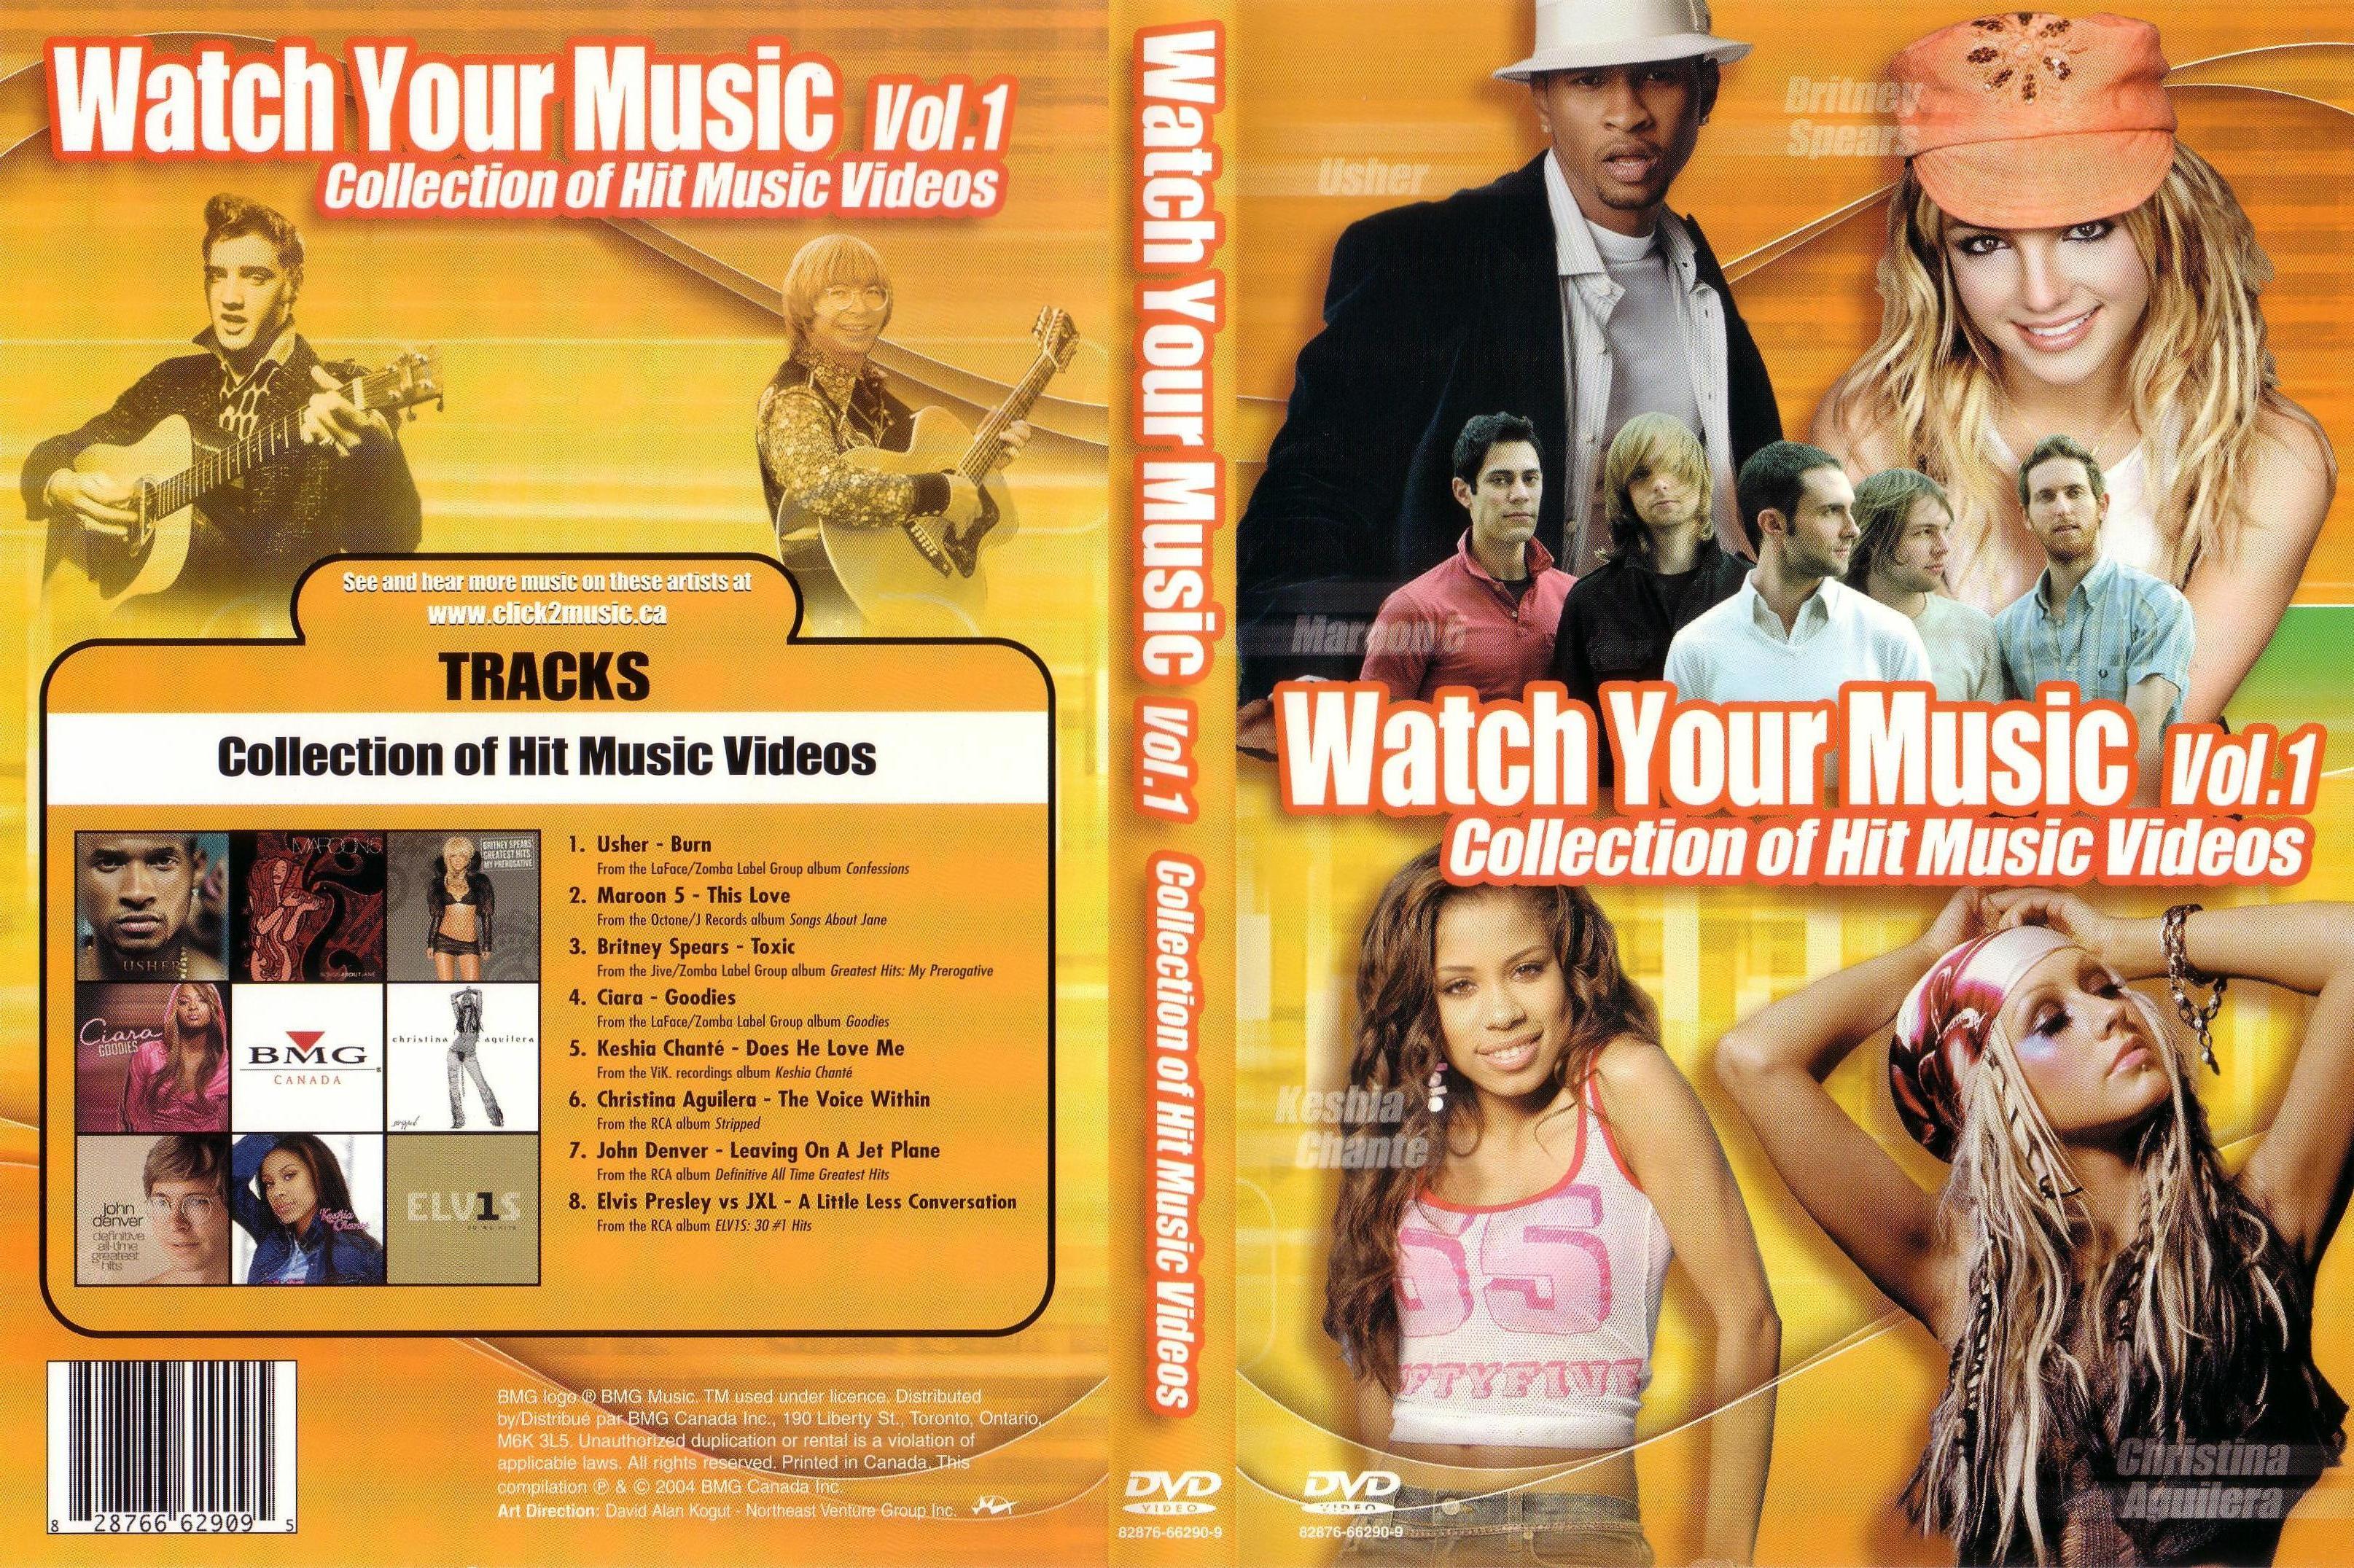 Jaquette DVD Watch your music vol 1